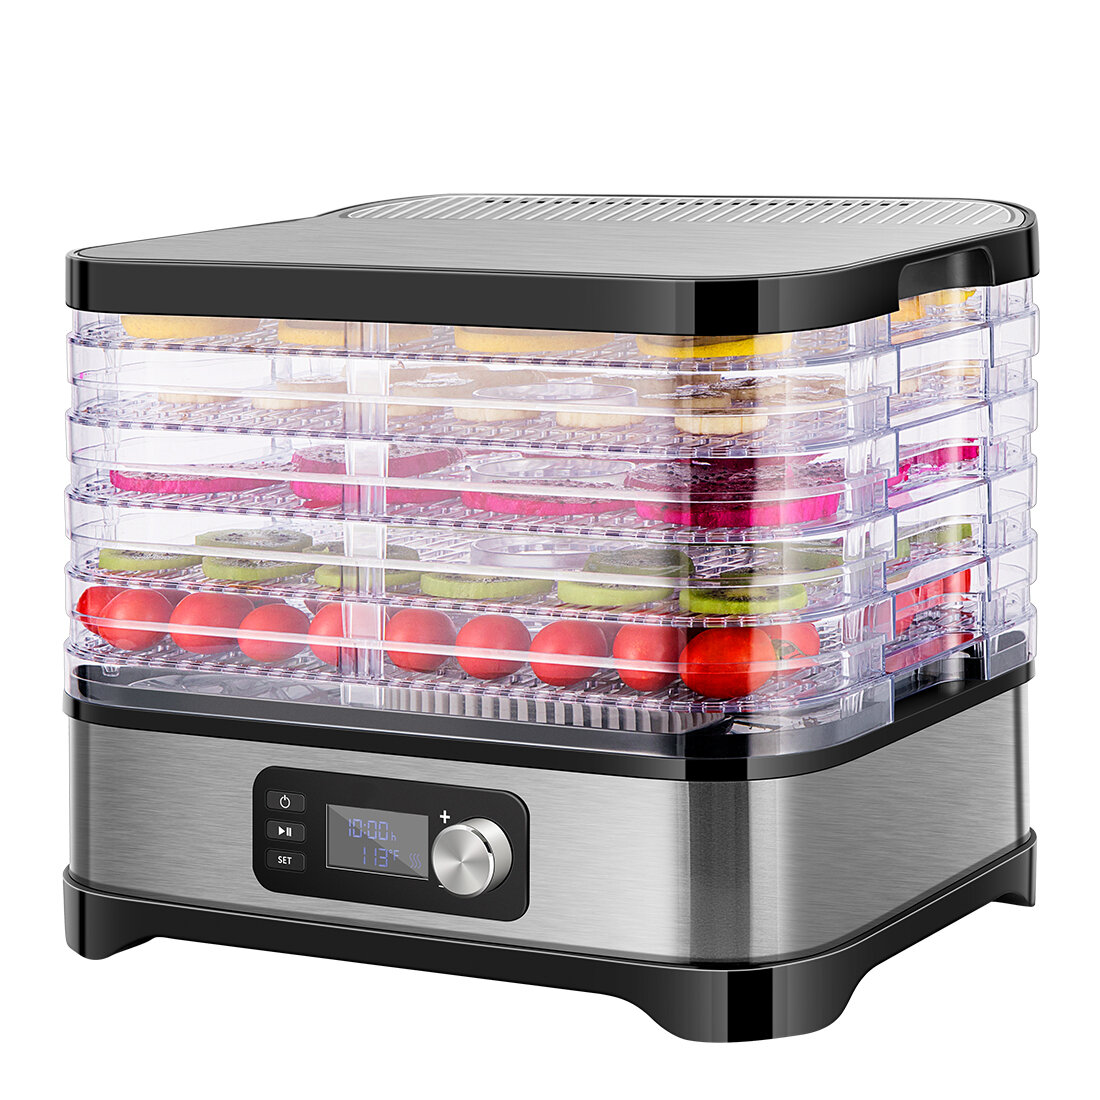 Details about   5 8 Trays Electric Food Dehydrator Machine Home Fruit Jerky Beef Meat B 109 